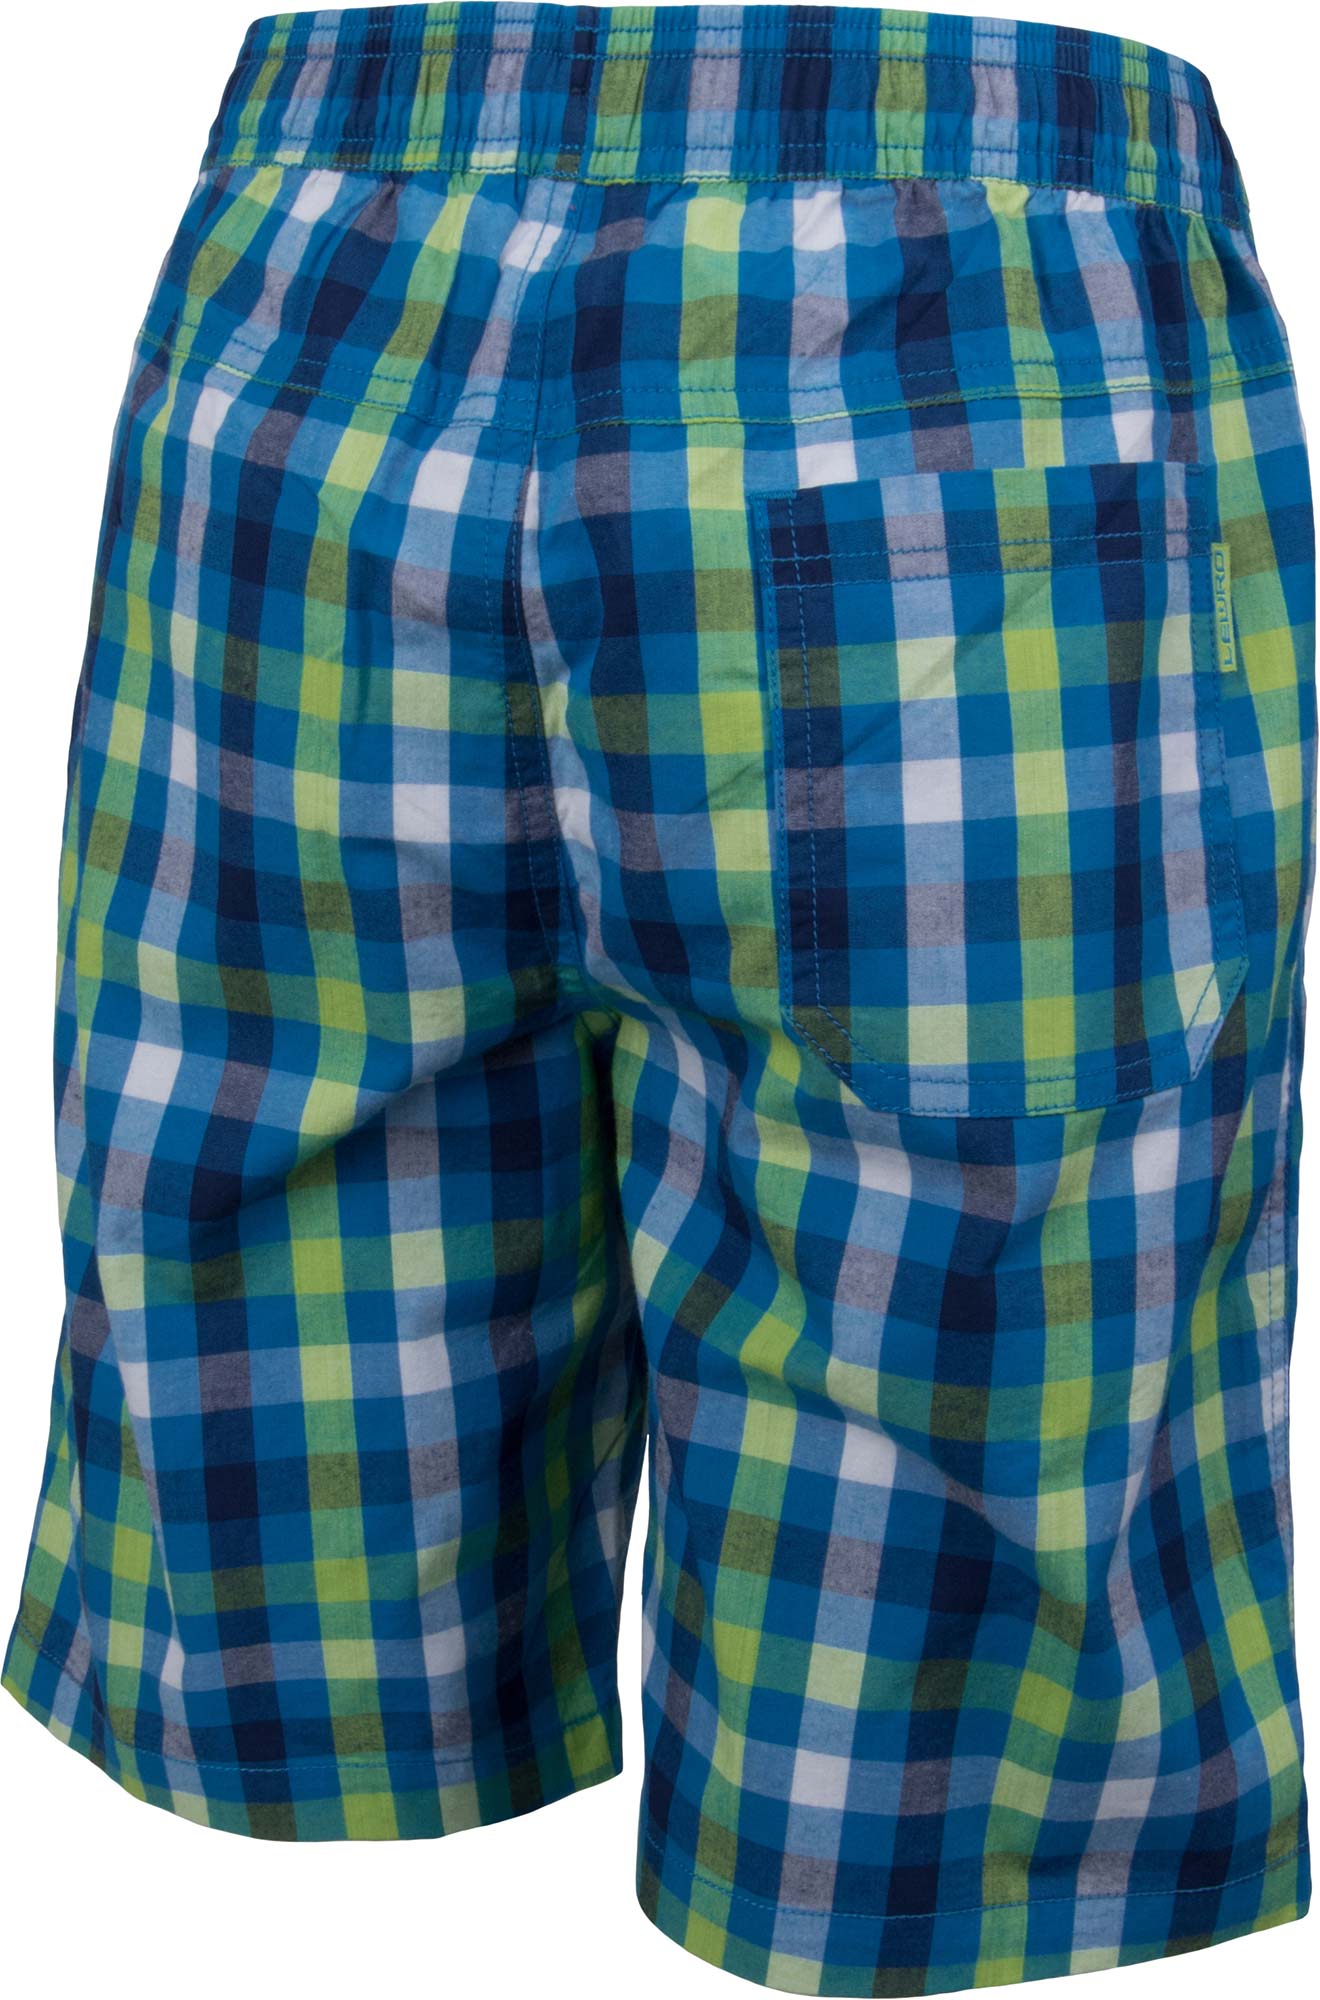 Boys’ shorts with checked pattern